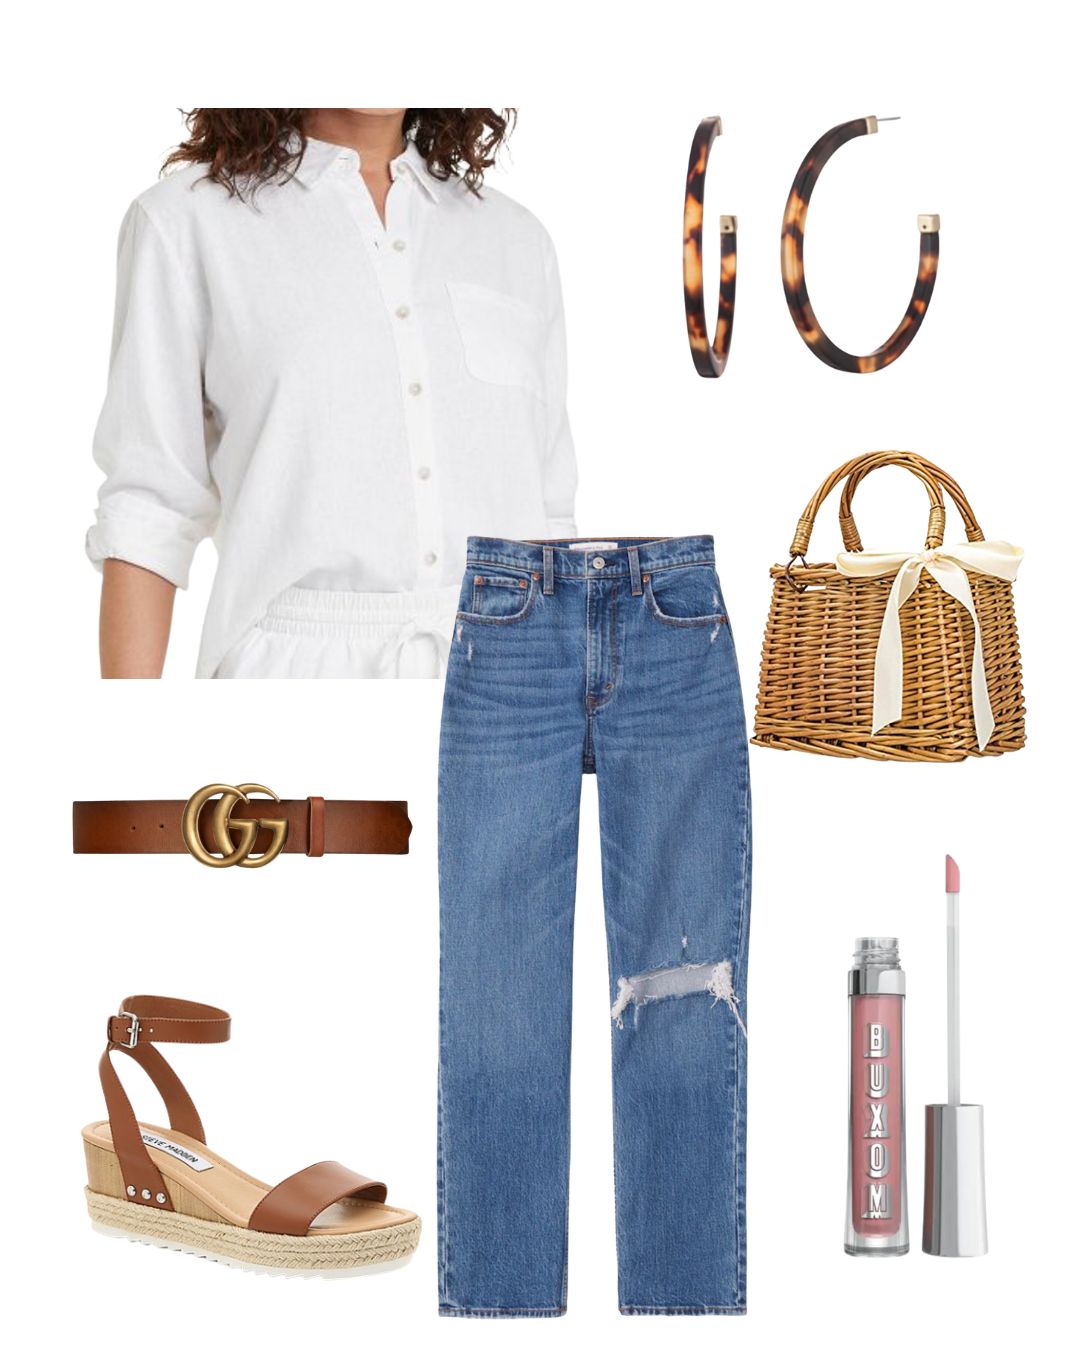 10 Outfit Ideas for Summer With Must-Have Wardrobe Staples - Linn